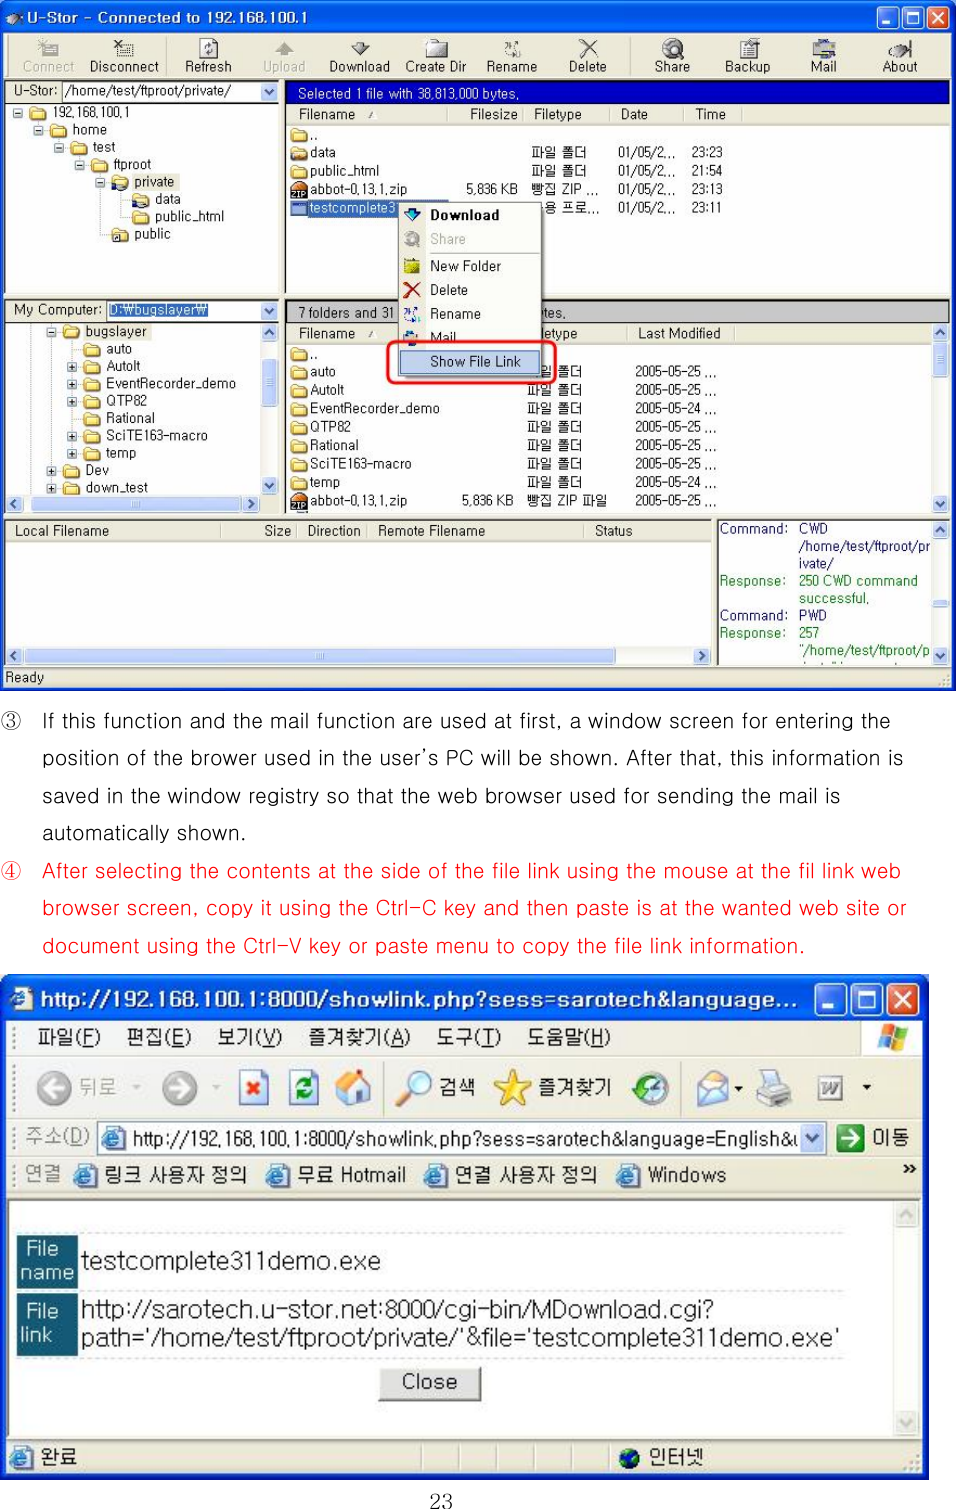  23 ③  If this function and the mail function are used at first, a window screen for entering the position of the brower used in the user’s PC will be shown. After that, this information is saved in the window registry so that the web browser used for sending the mail is automatically shown. ④  After selecting the contents at the side of the file link using the mouse at the fil link web browser screen, copy it using the Ctrl-C key and then paste is at the wanted web site or document using the Ctrl-V key or paste menu to copy the file link information.  